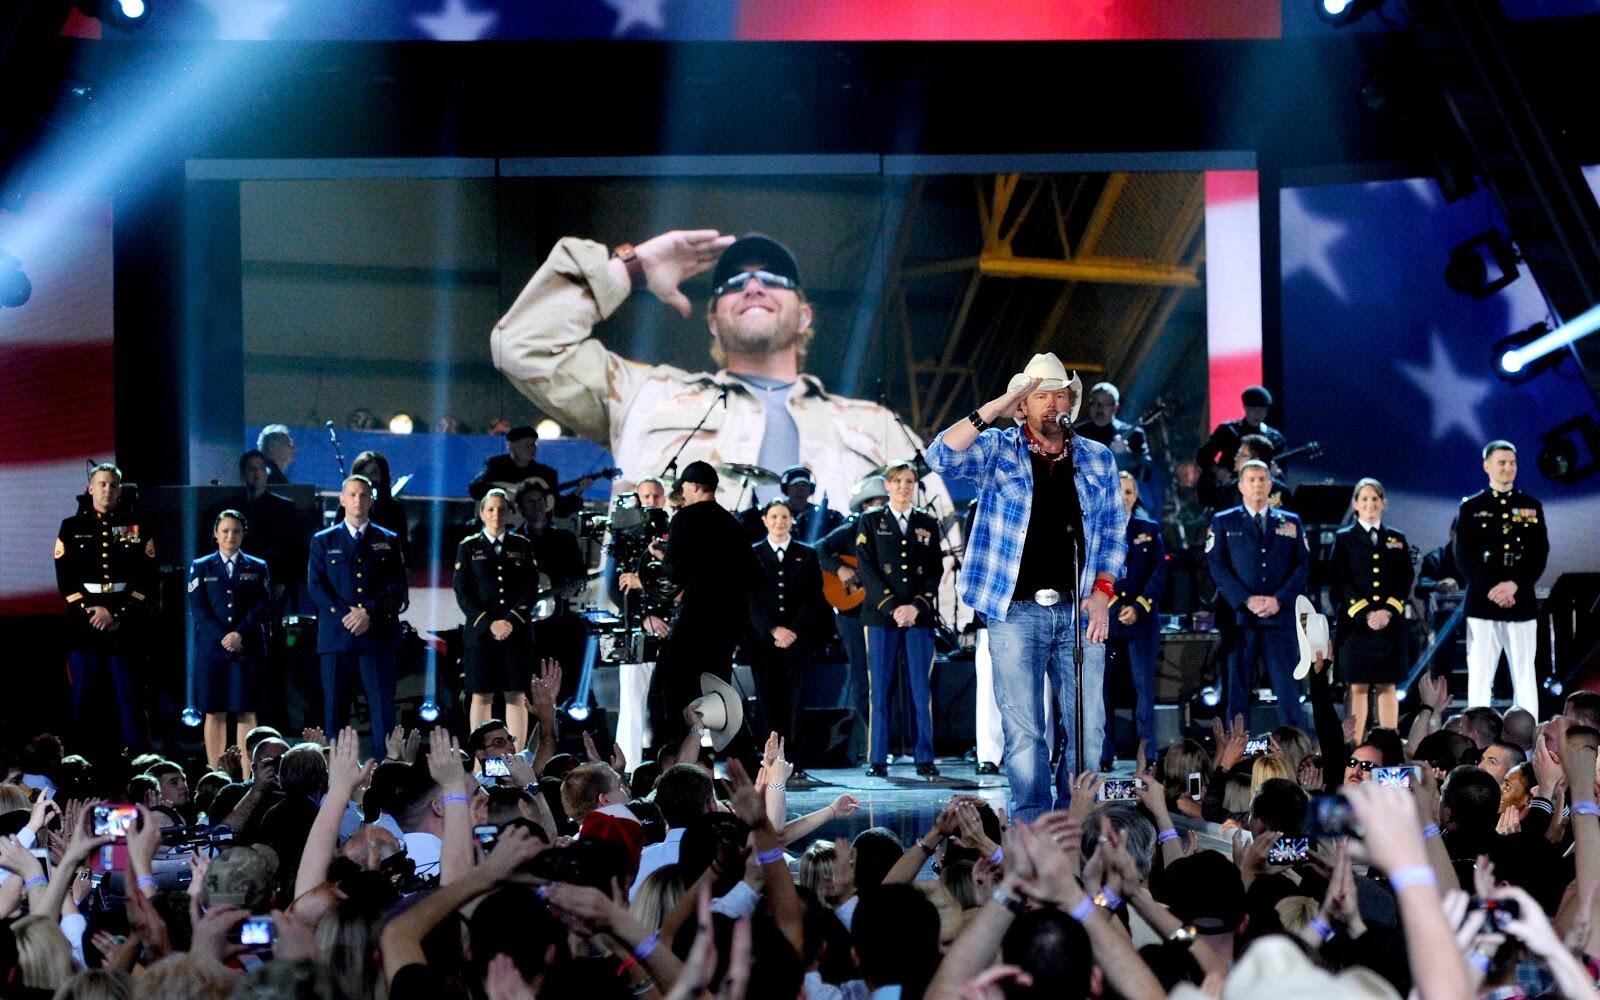 LAS VEGAS, NV - APRIL 07:  Recording artist Toby Keith performs onstage during ACM Presents: An All-Star Salute To The Troops at the MGM Grand Garden Arena on April 7, 2014 in Las Vegas, Nevada.  (Photo by Ethan Miller/Getty Images for ACM)